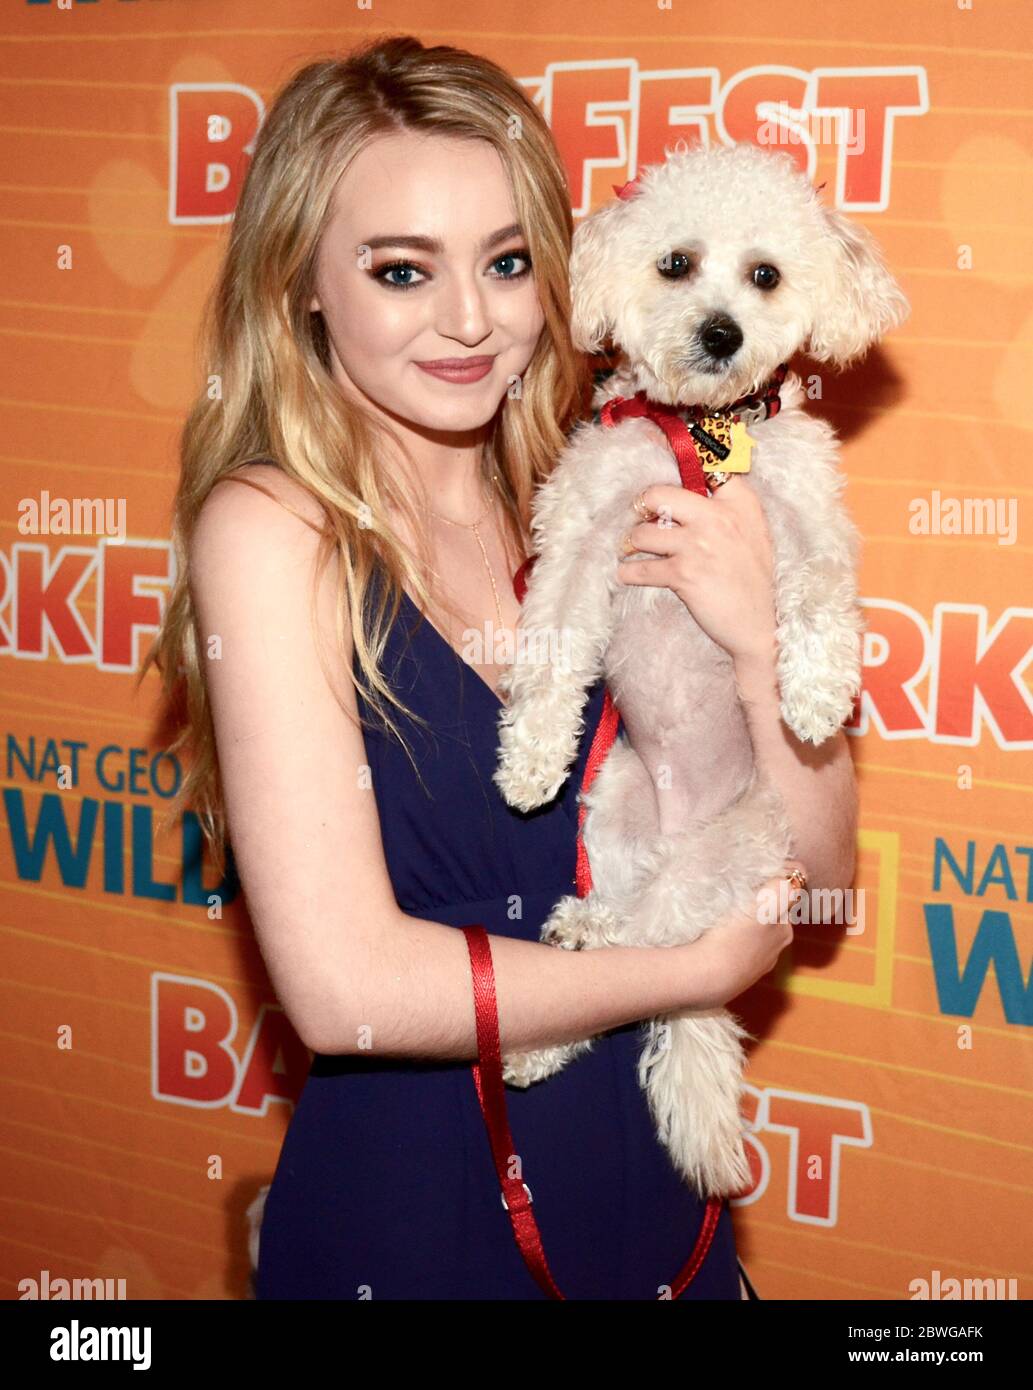 April 9, 2016: Savannah Kennick  attends Nat Geo WILD 2nd Annual Barkfest at Palihouse Hotel on April 9, 2016 in West Hollywood, California. (Credit Image: © Billy Bennight/ZUMA Wire) Stock Photo